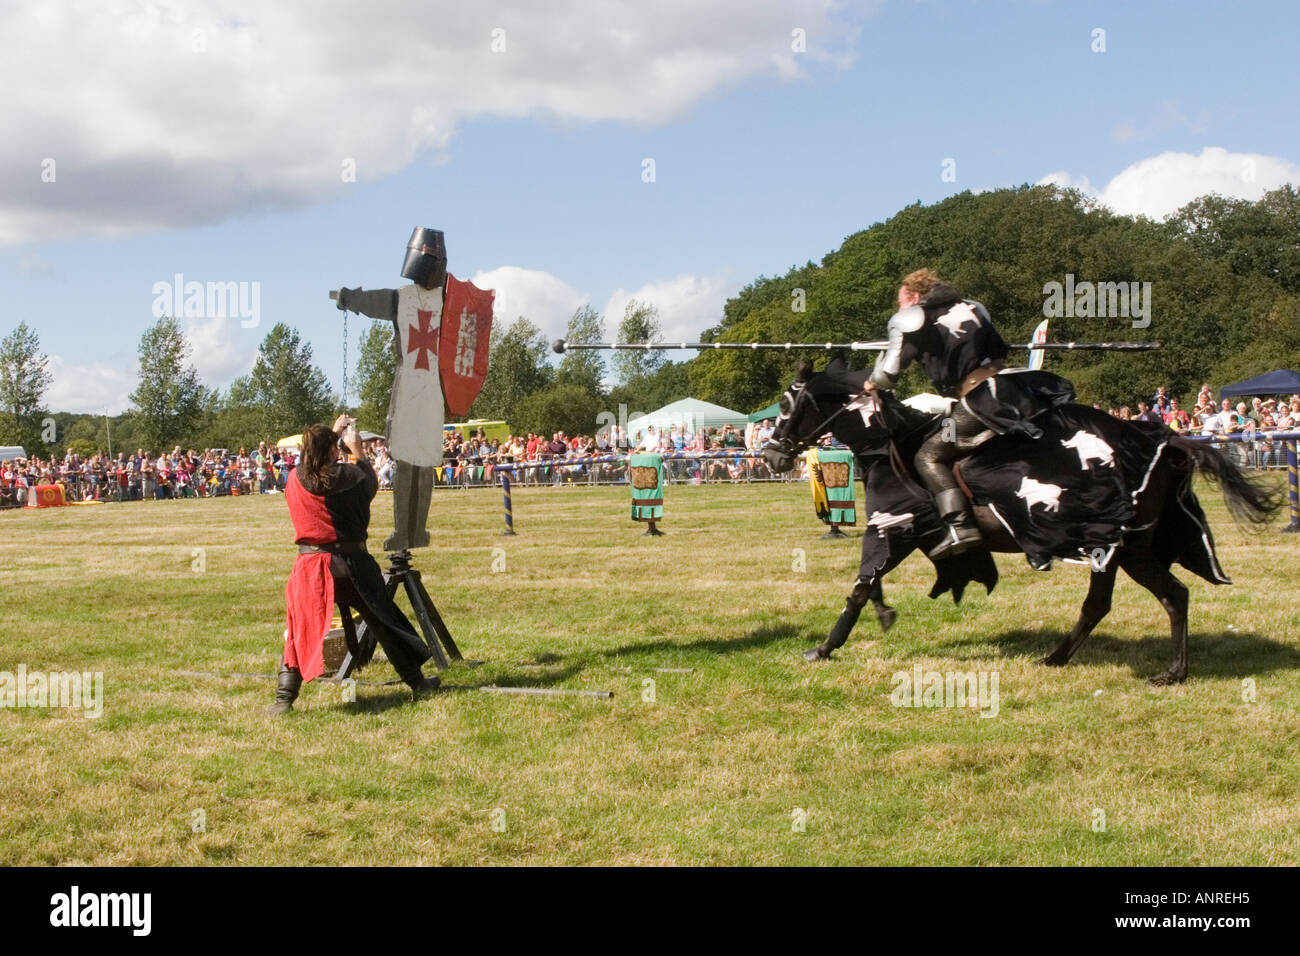 Knights jousting at an historical re-enactment of a jousting tournament Stock Photo